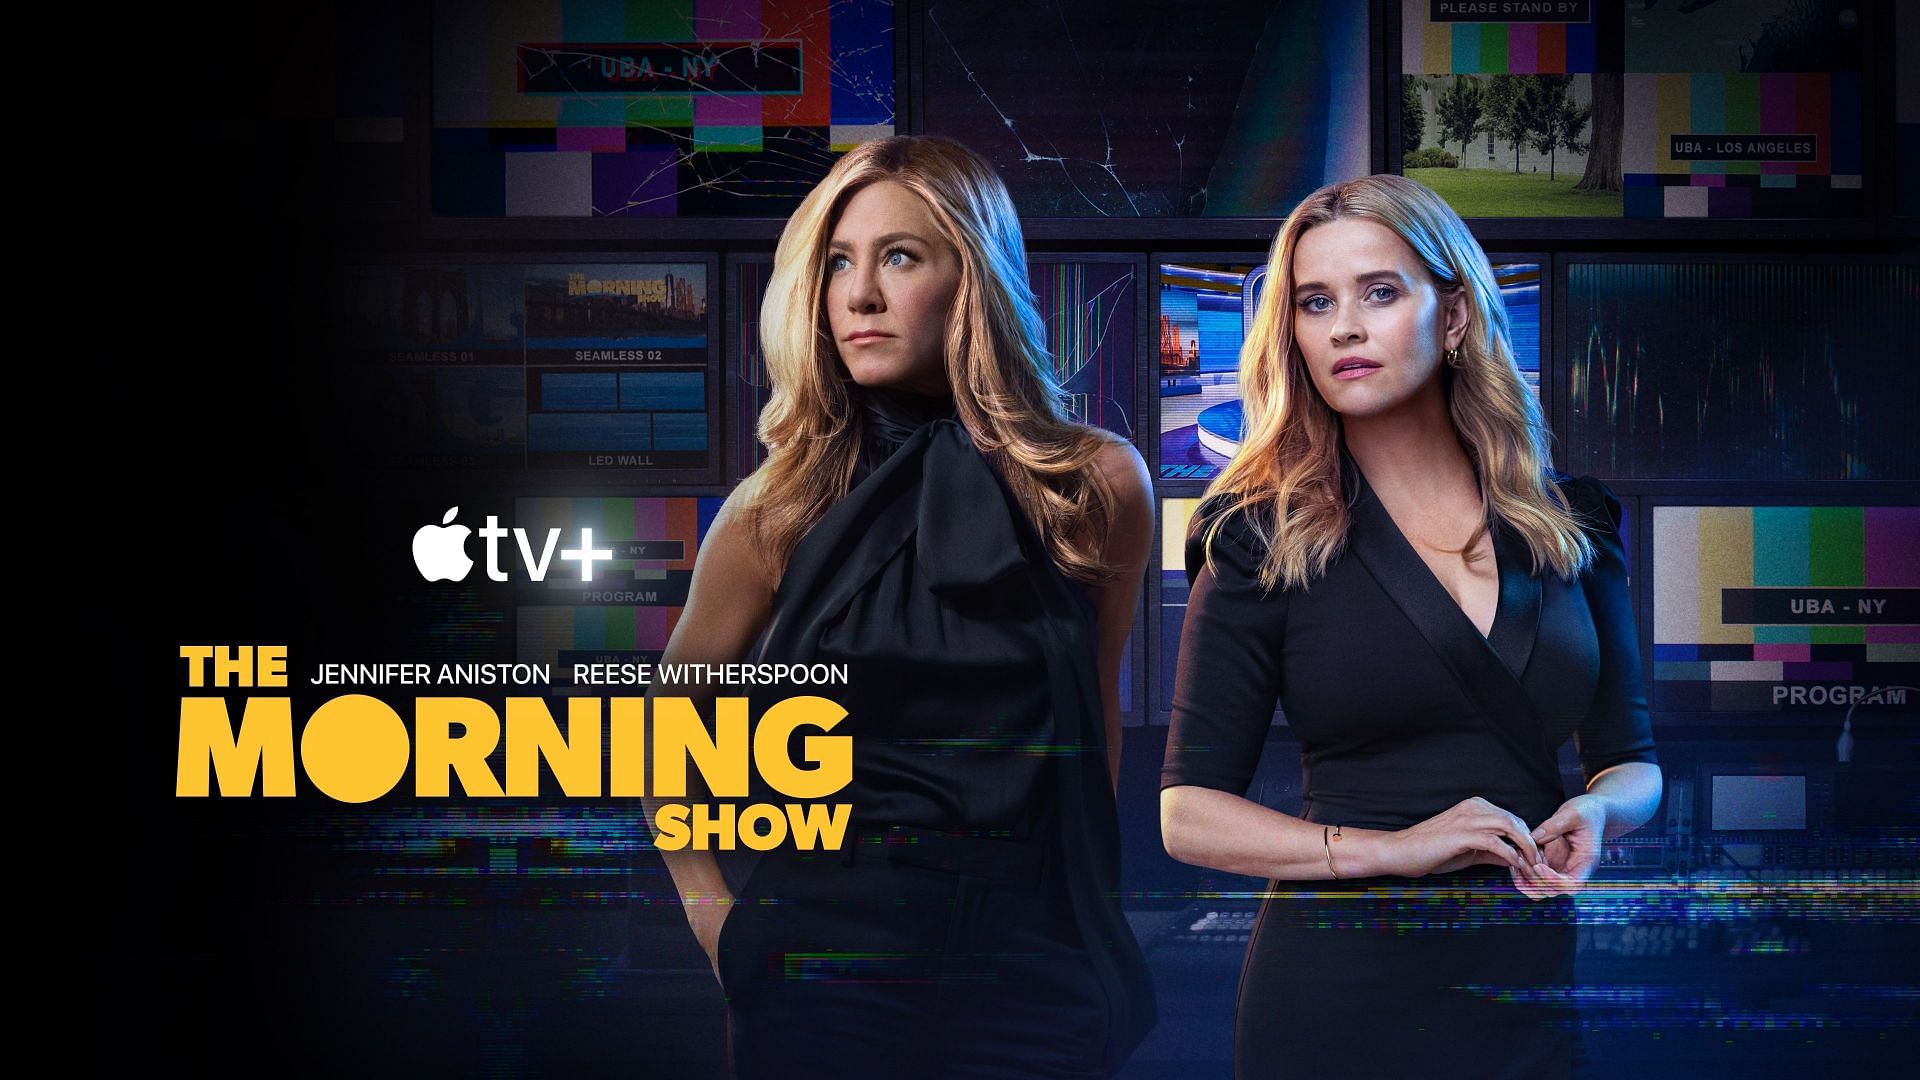 5 fun facts about The Morning Show actor Reese Witherspoon (Image via Apple TV+)